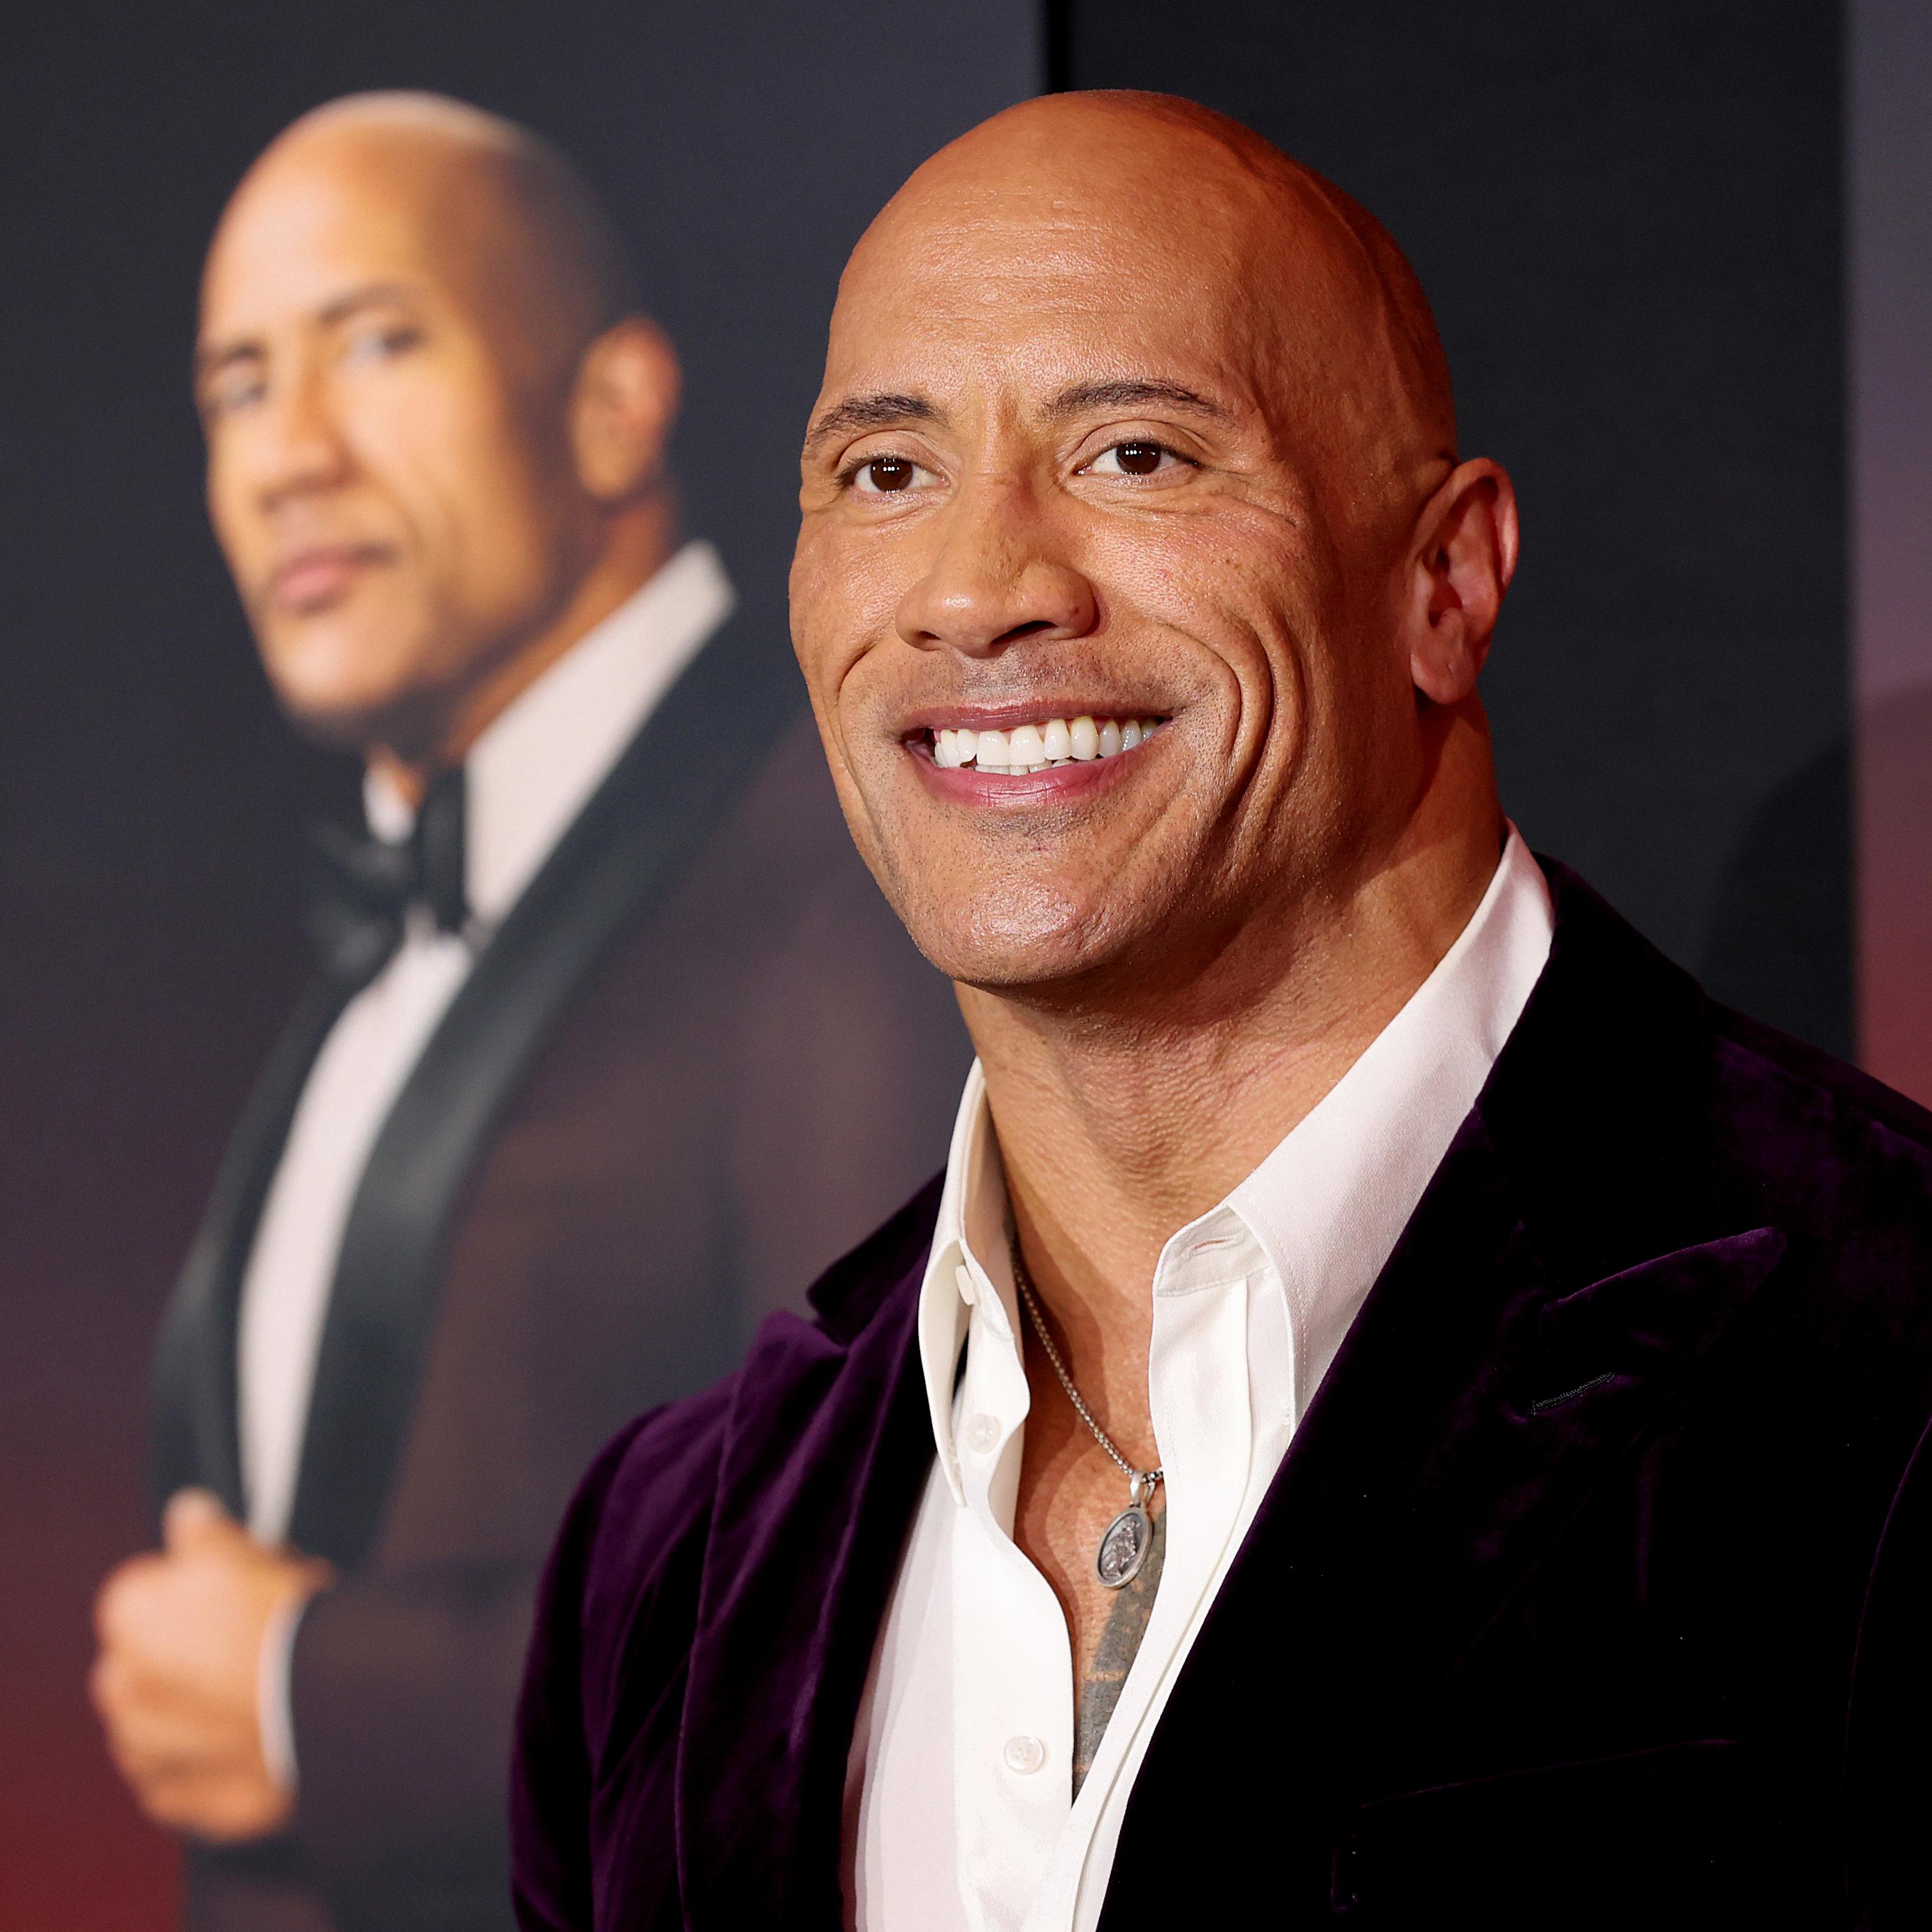 is the rock and dwayne johnson the same person